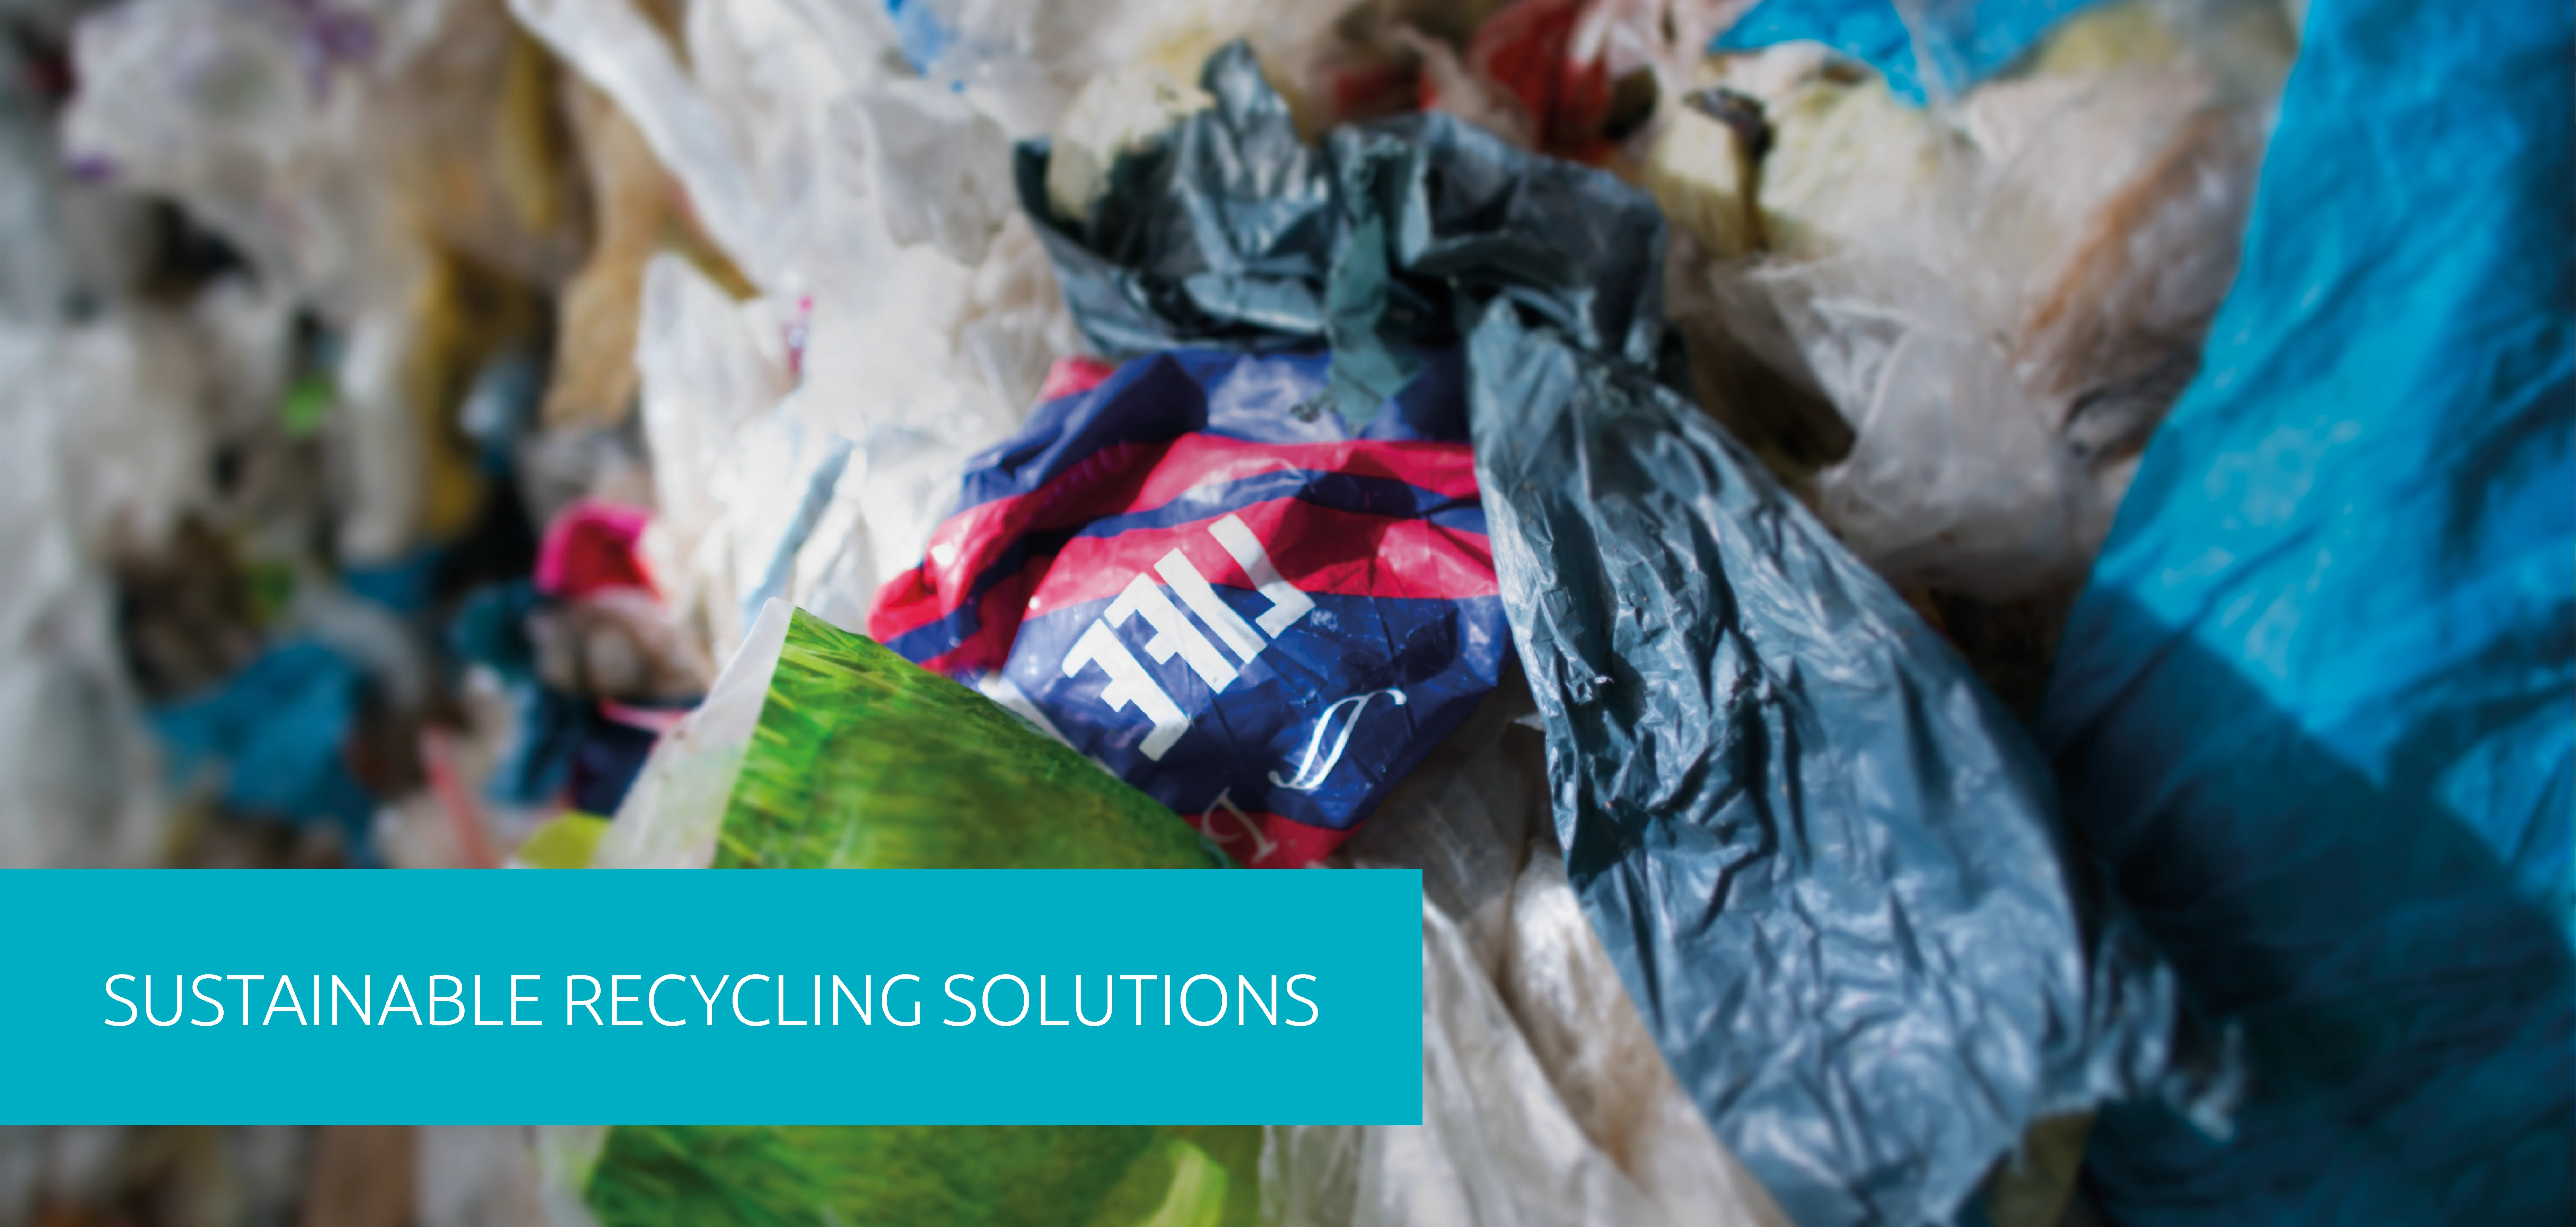 Sustainable recycling solutions